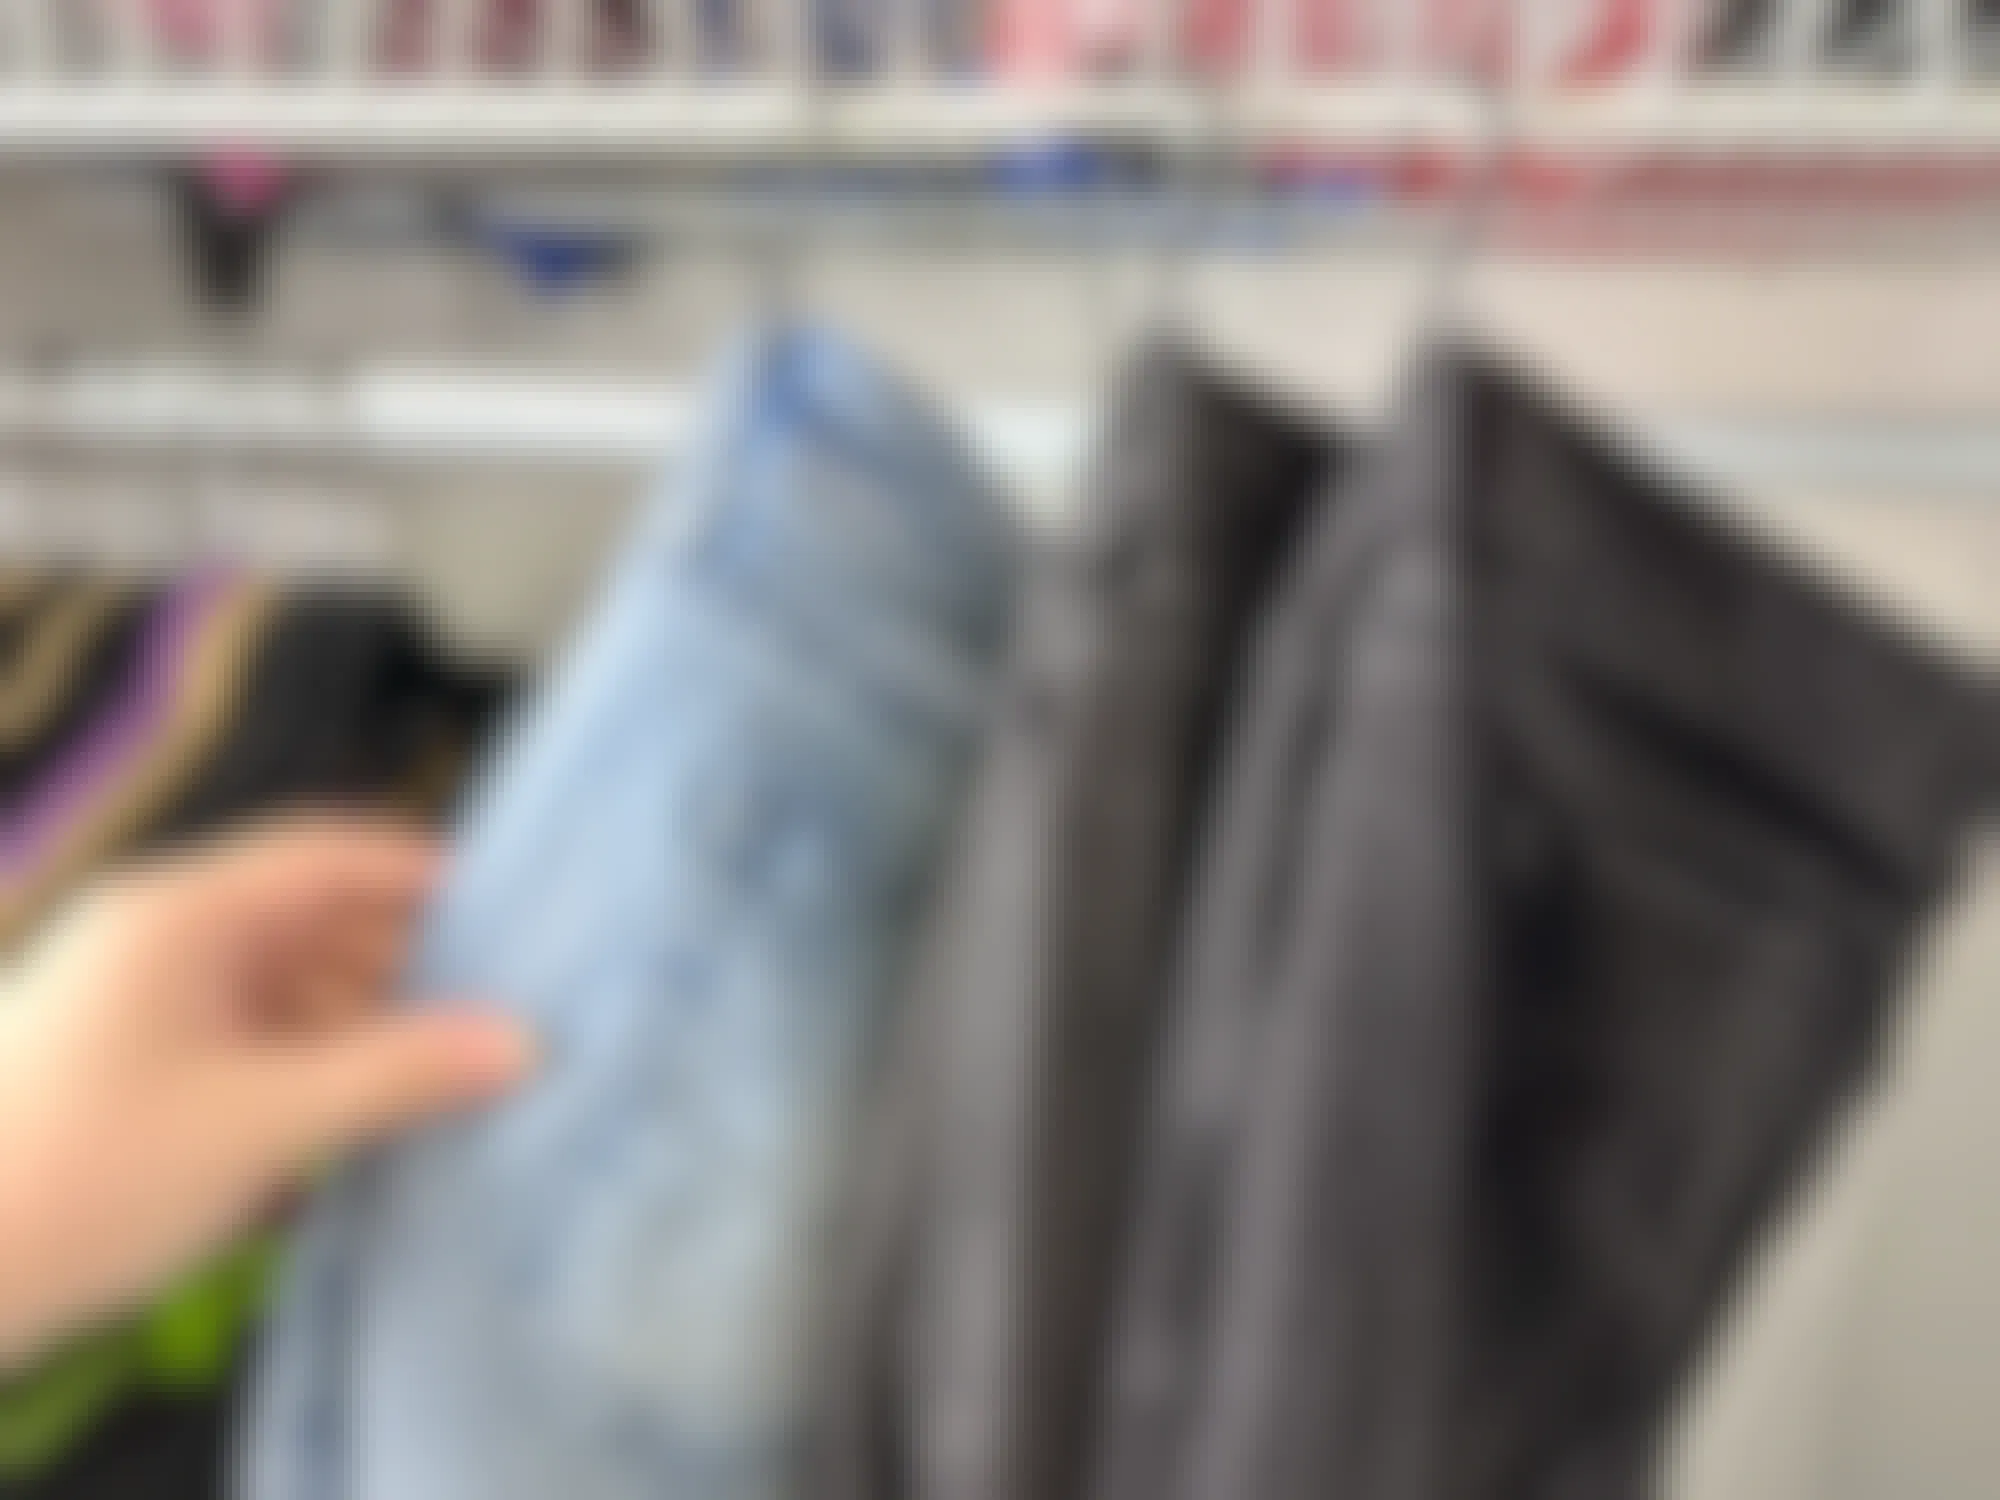 Someone hanging jeans on s hooks inside a closet